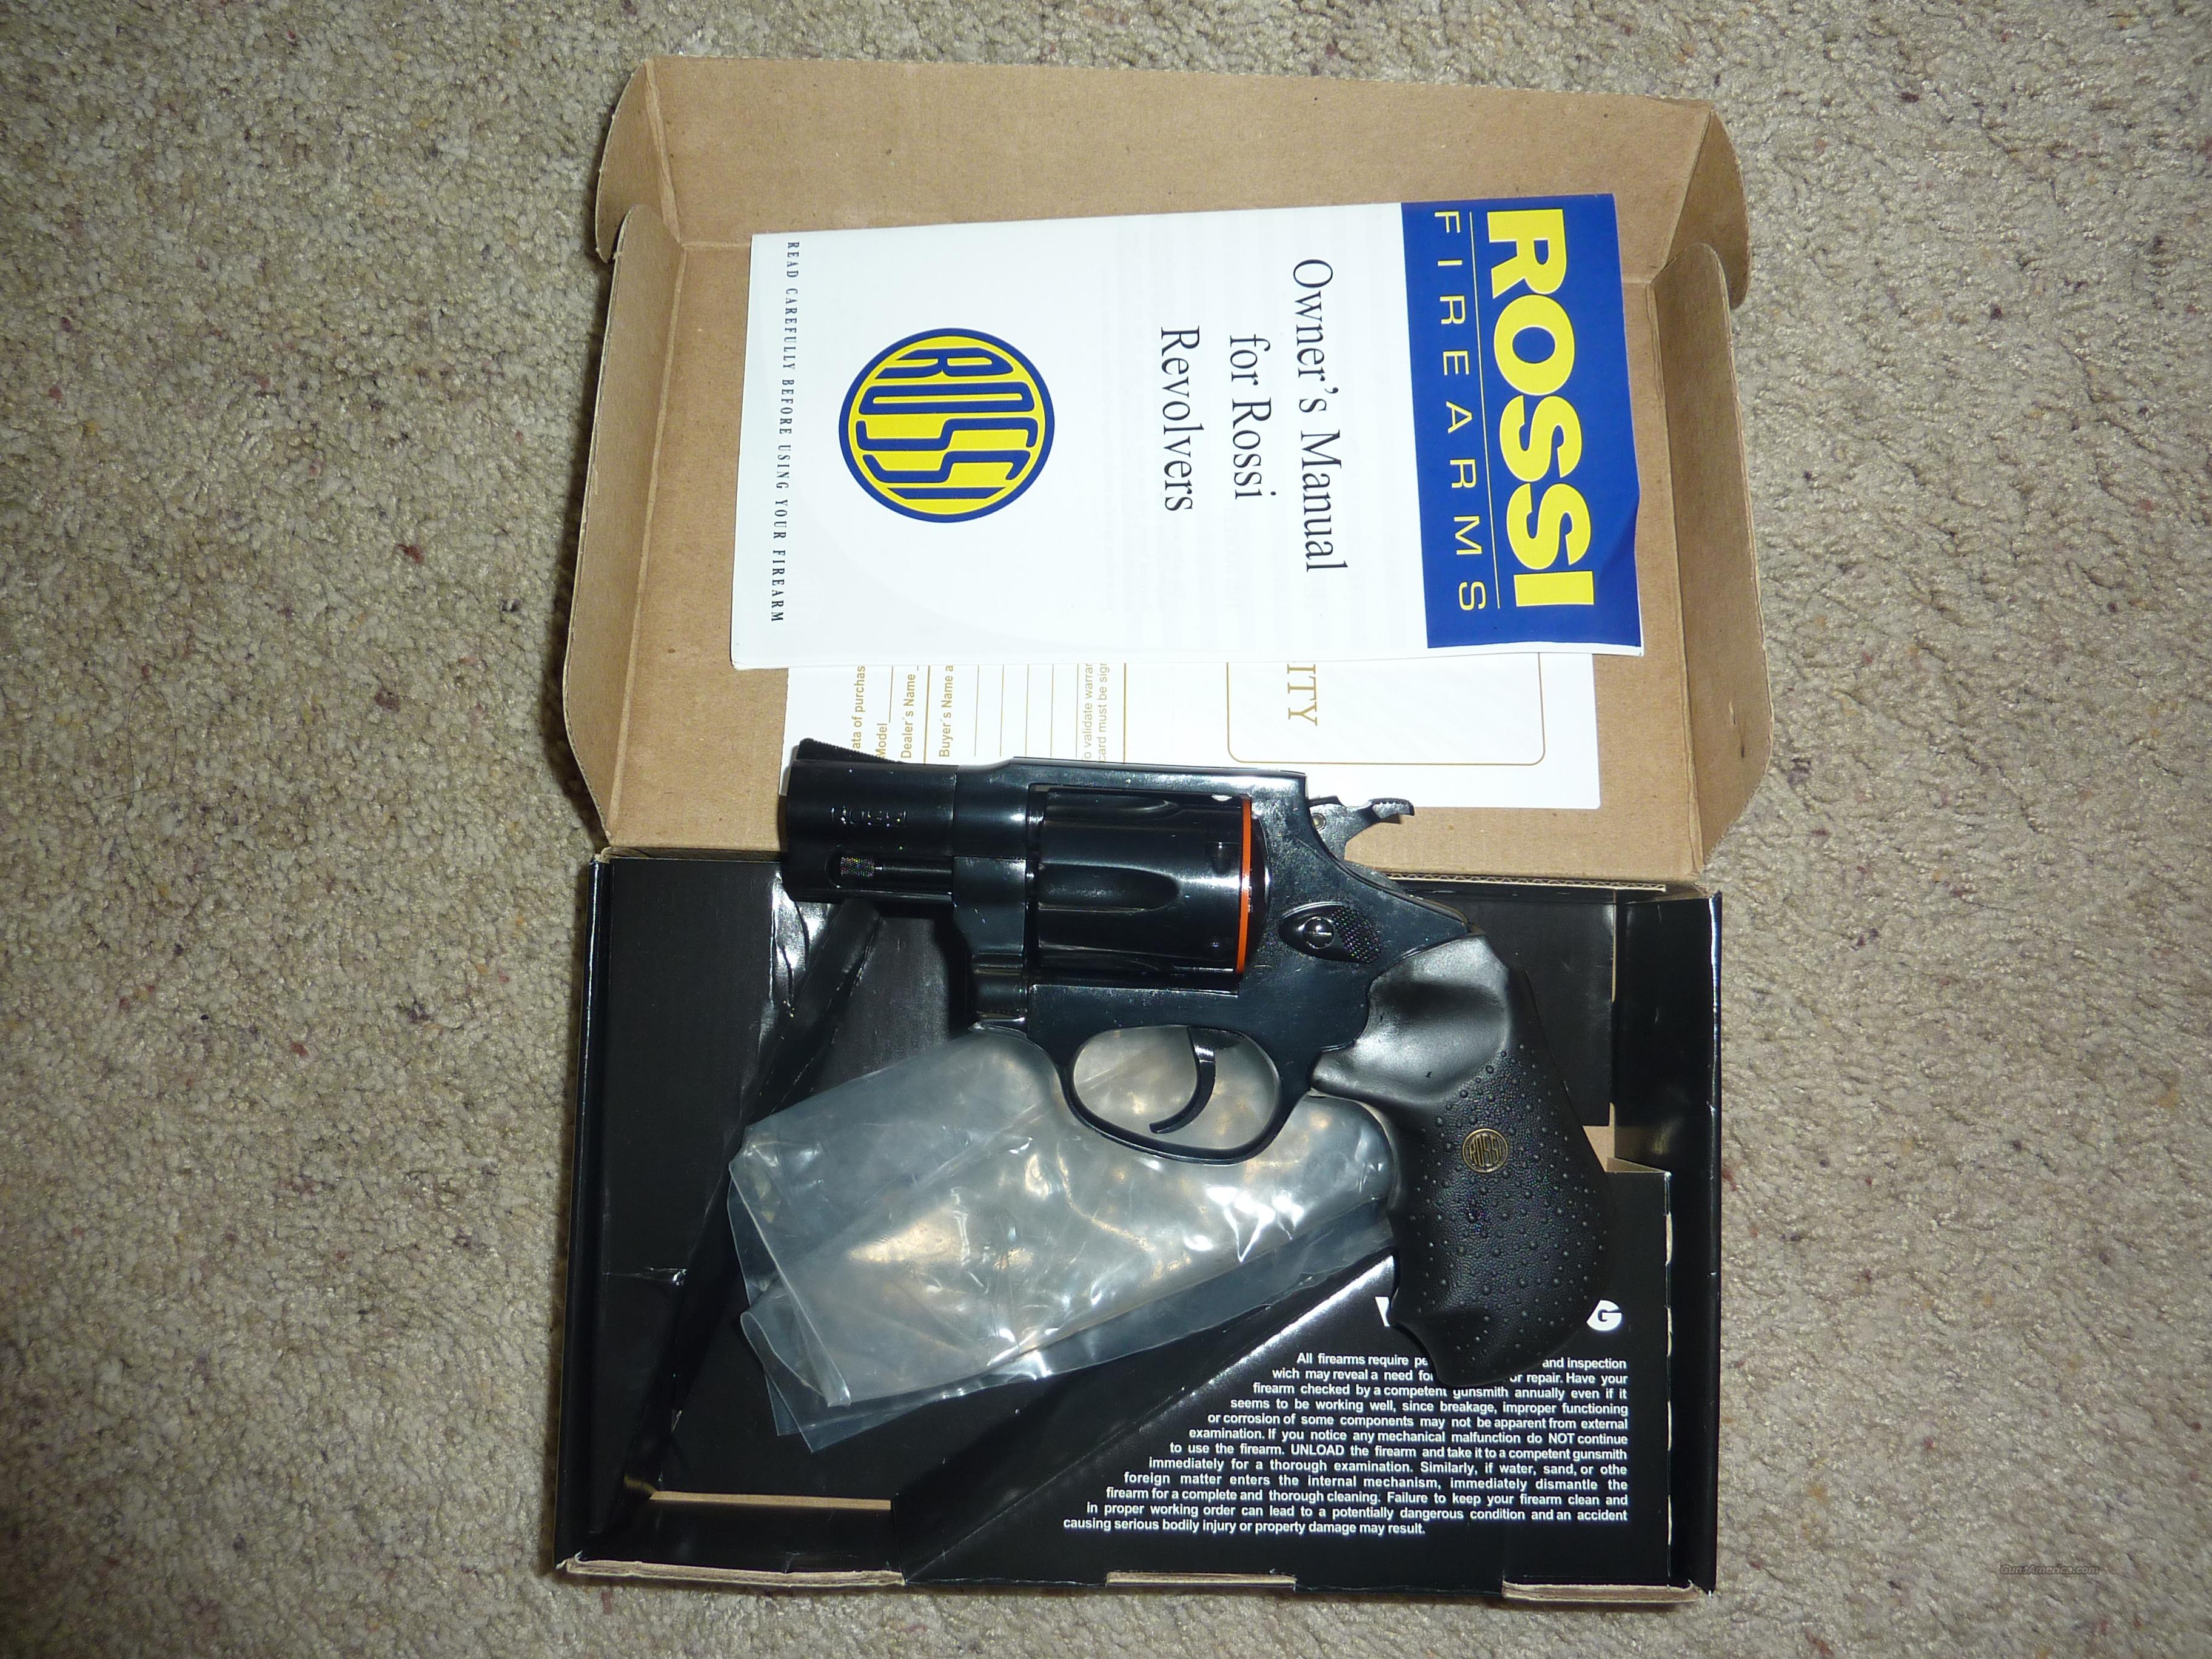 Brand New Rossi M461 357 38 Snub Nose 6 Shot For Sale